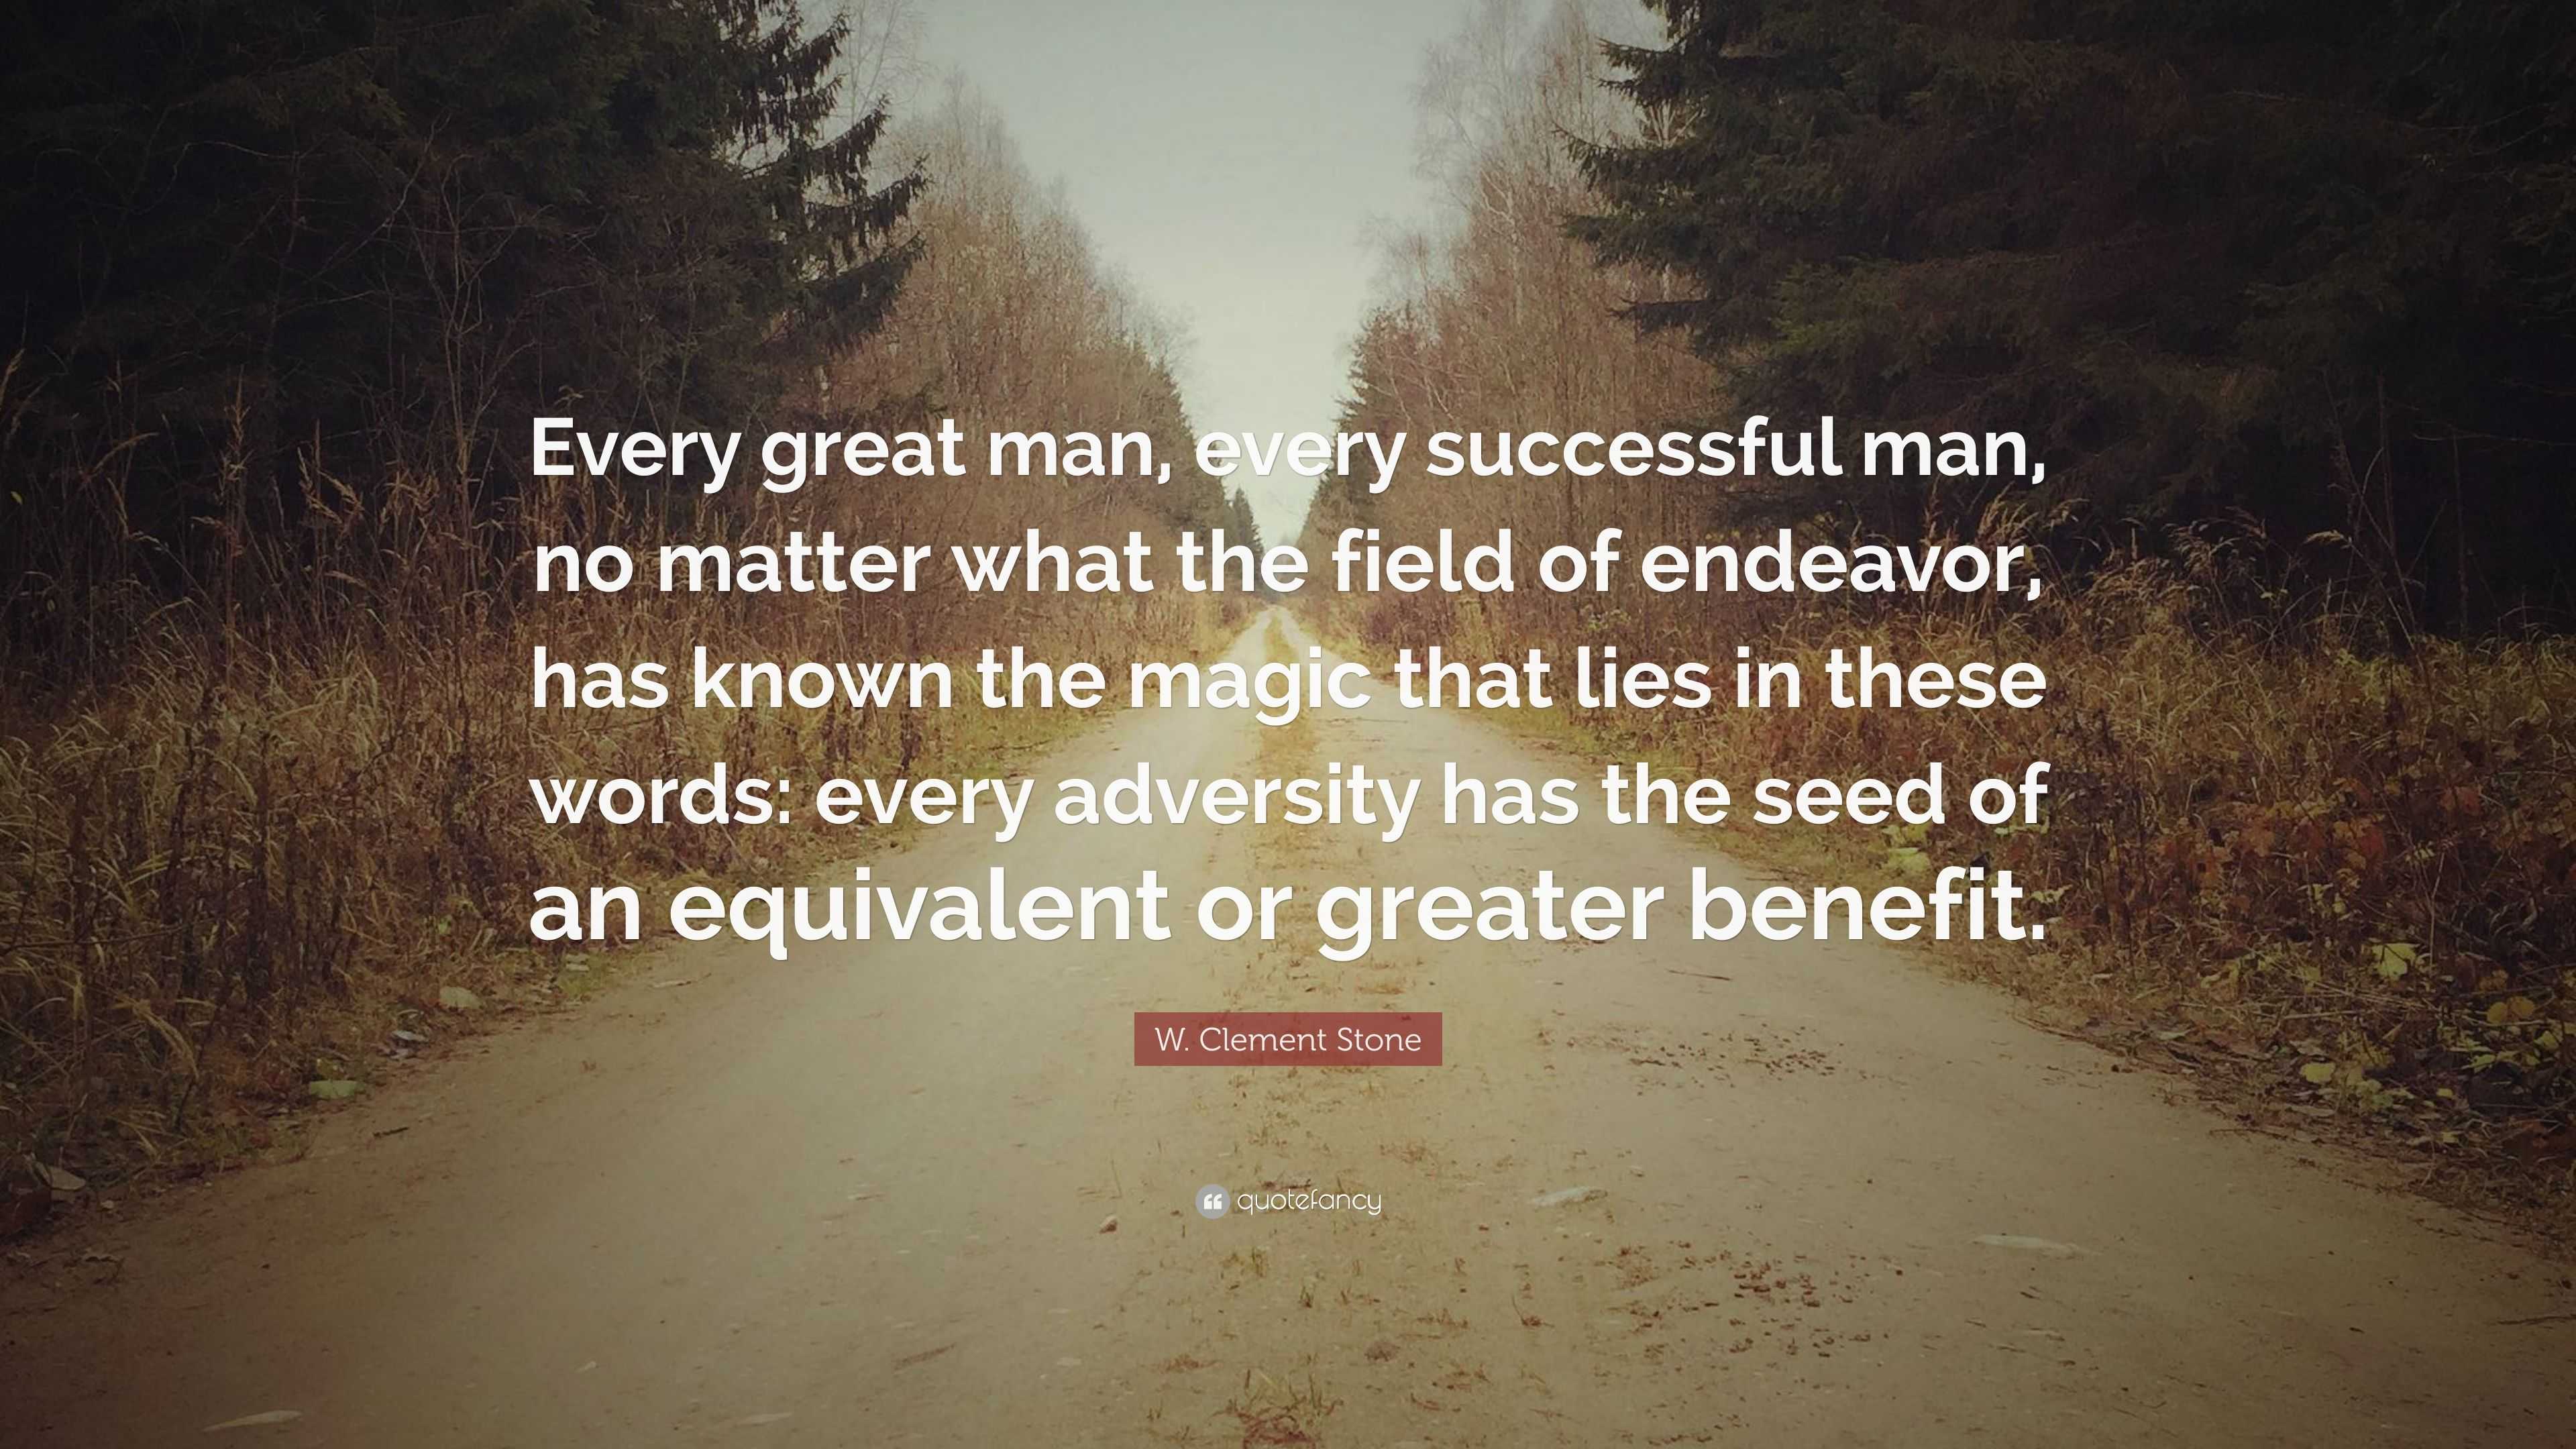 W. Clement Stone Quote: “Every great man, every successful man, no ...